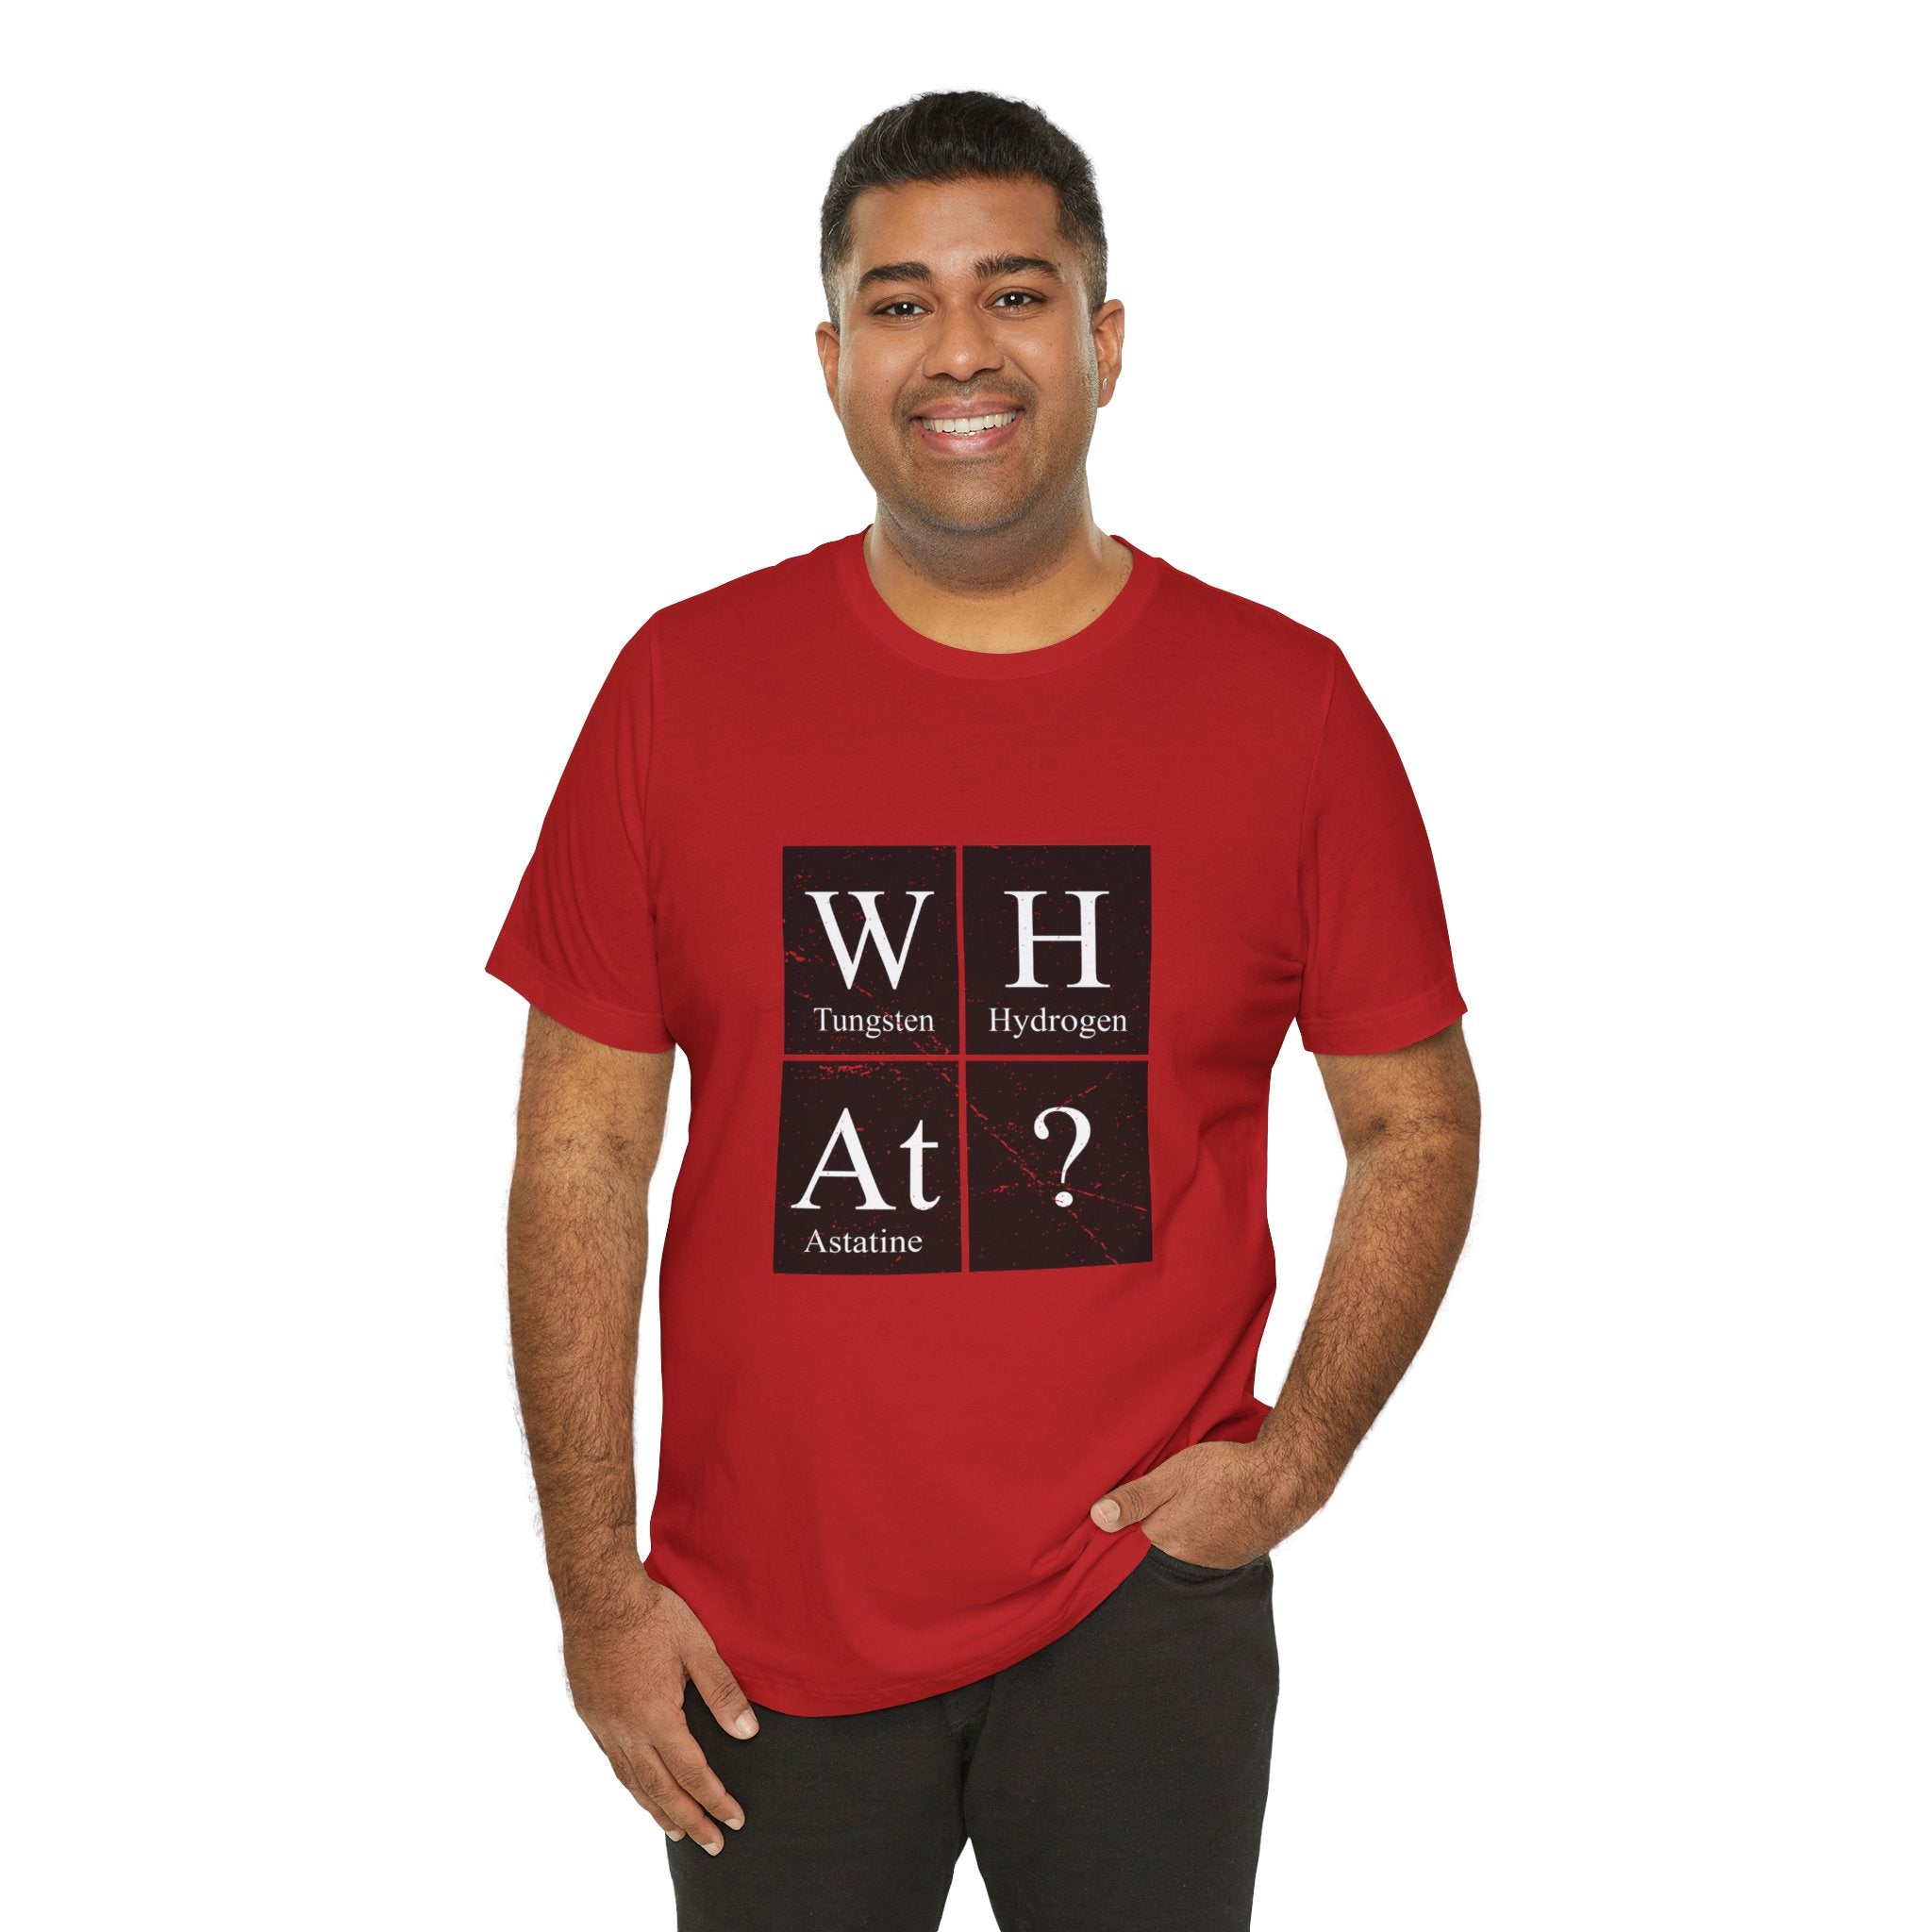 Man in a red unisex jersey tee with a W-H-At-? design smiling and standing against a white background.